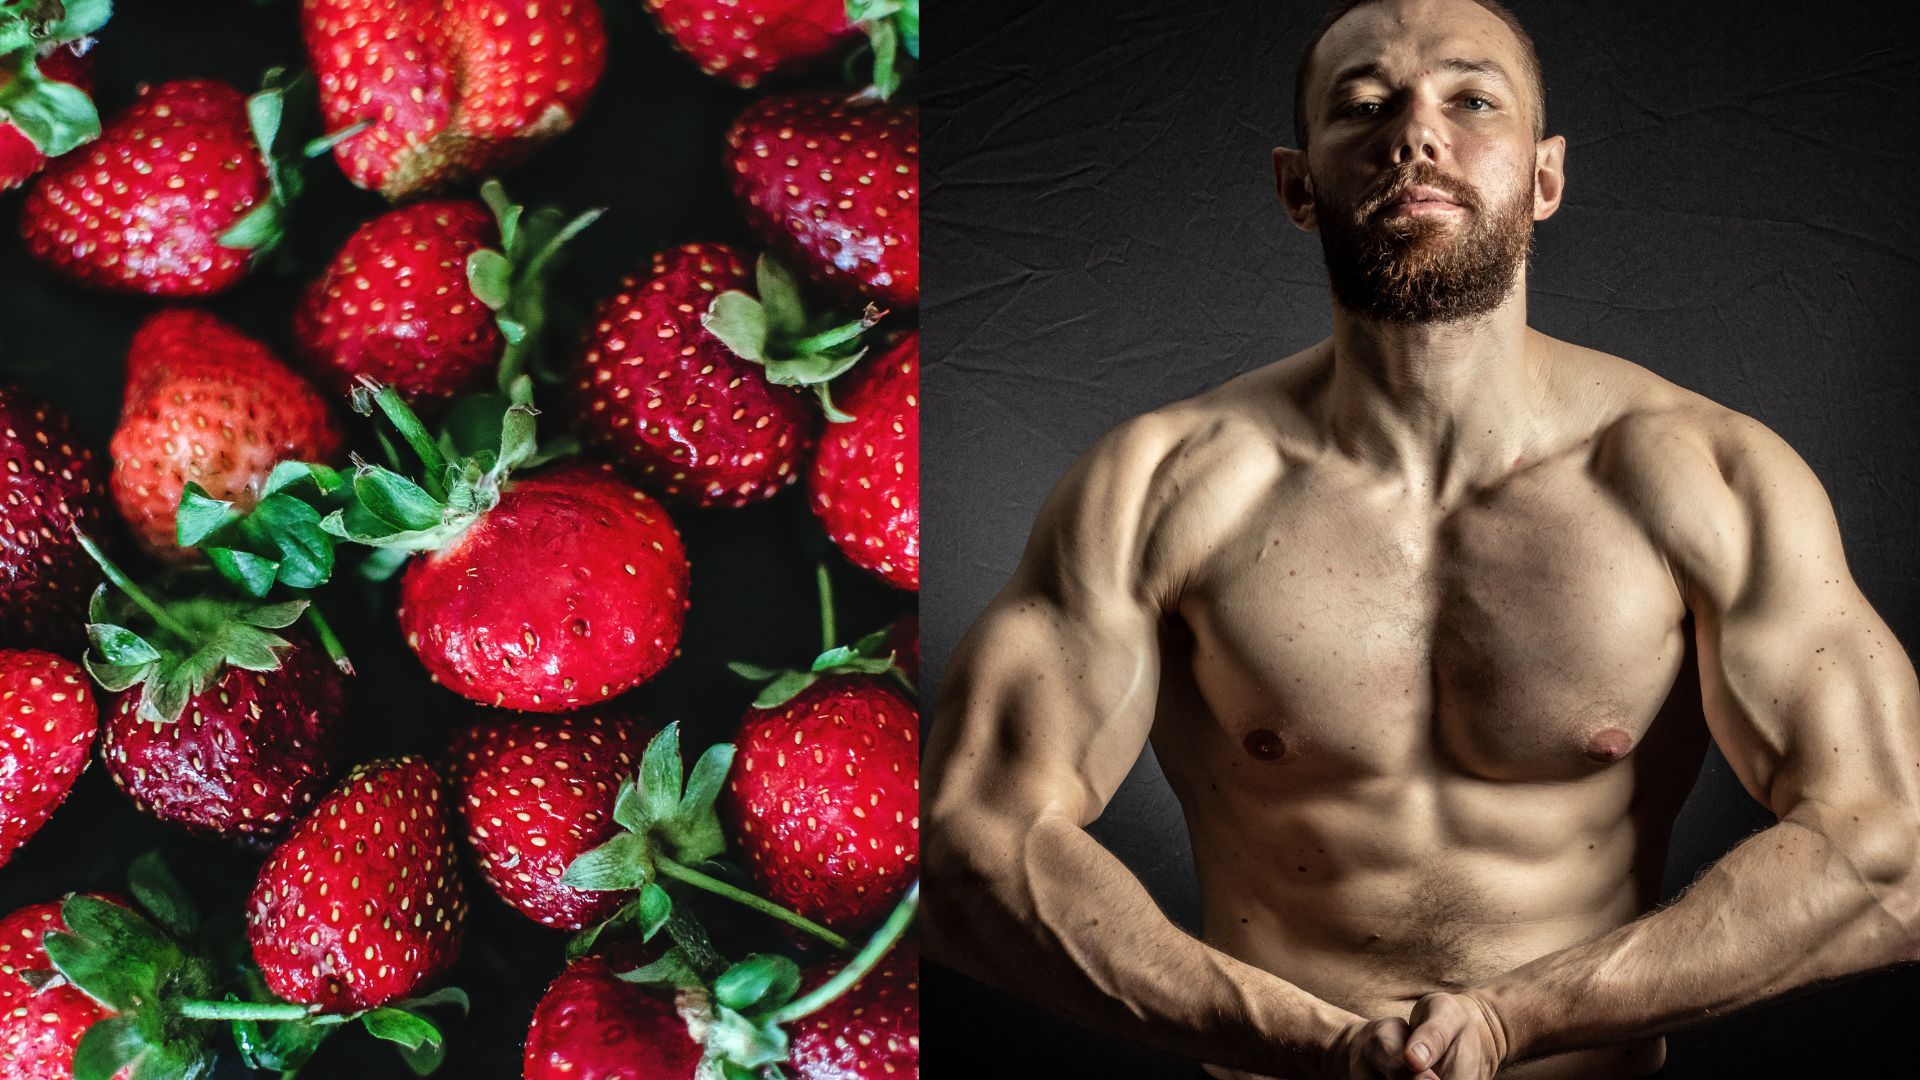 Should I eat more strawberries to gain muscle when I squat: A Comprehensive Guide